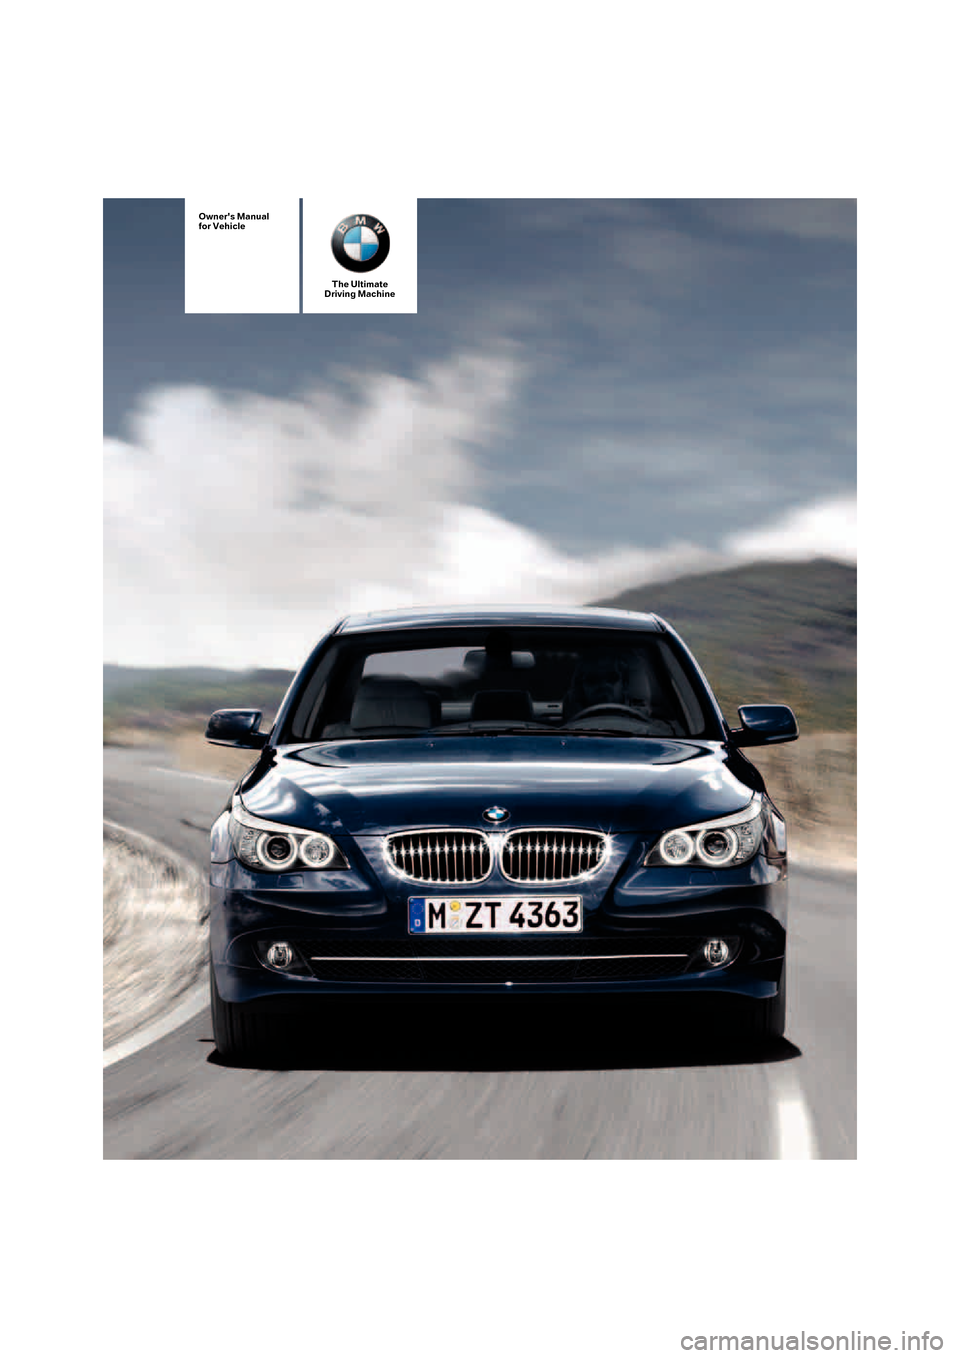 BMW 528XI SEDAN 2007 E60 Owners Manual The Ultimate
Driving Machine
Owners Manual
for Vehicle 